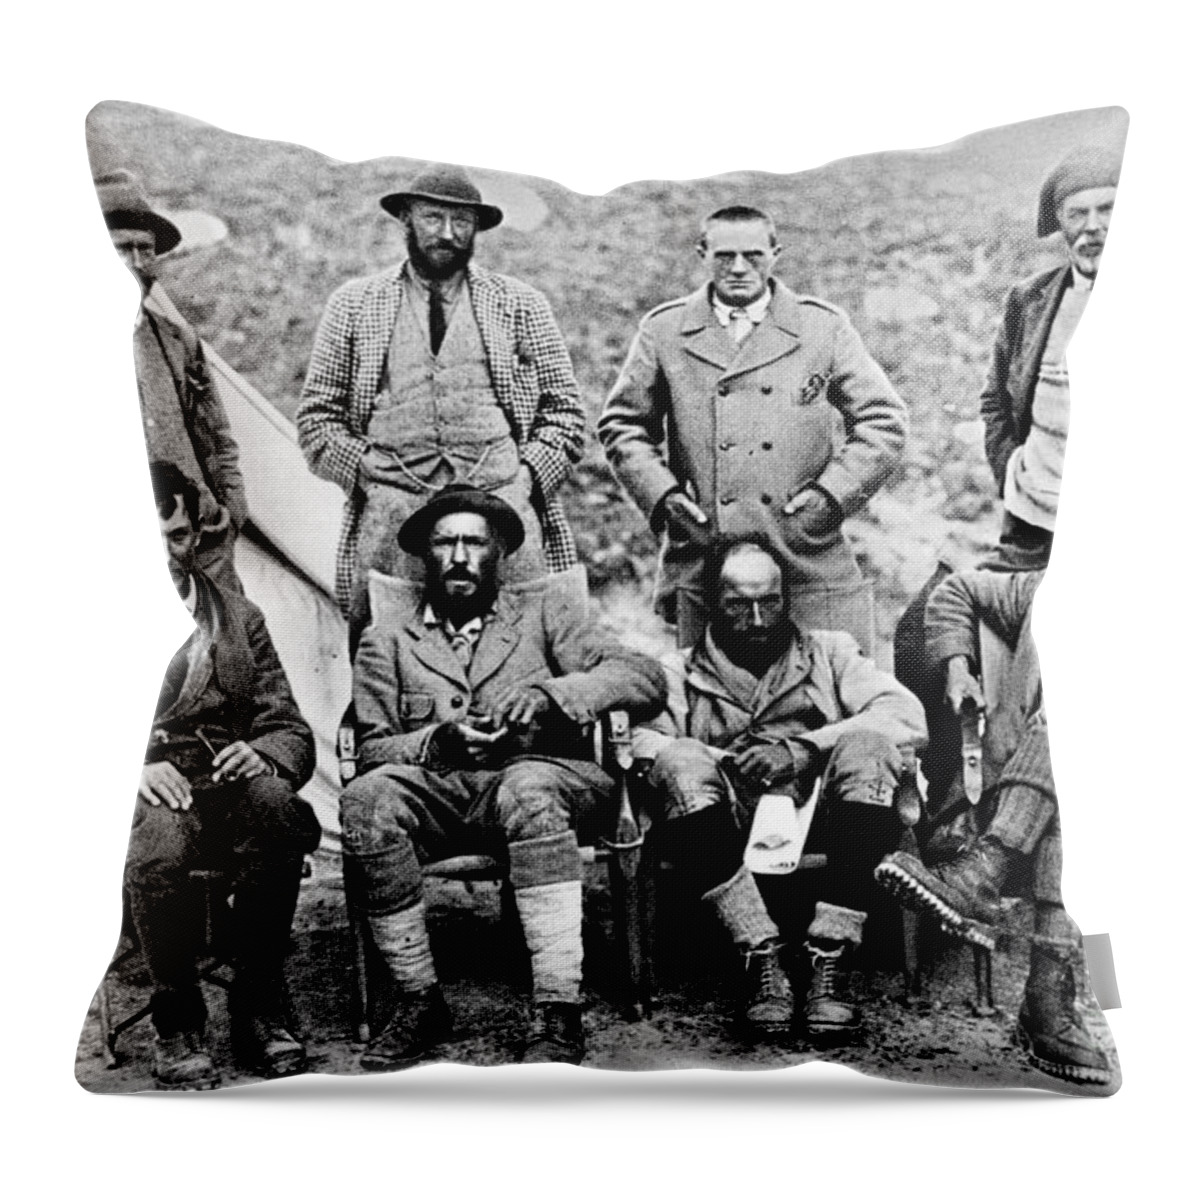 1921 Throw Pillow featuring the photograph Mount Everest Expedition by Granger